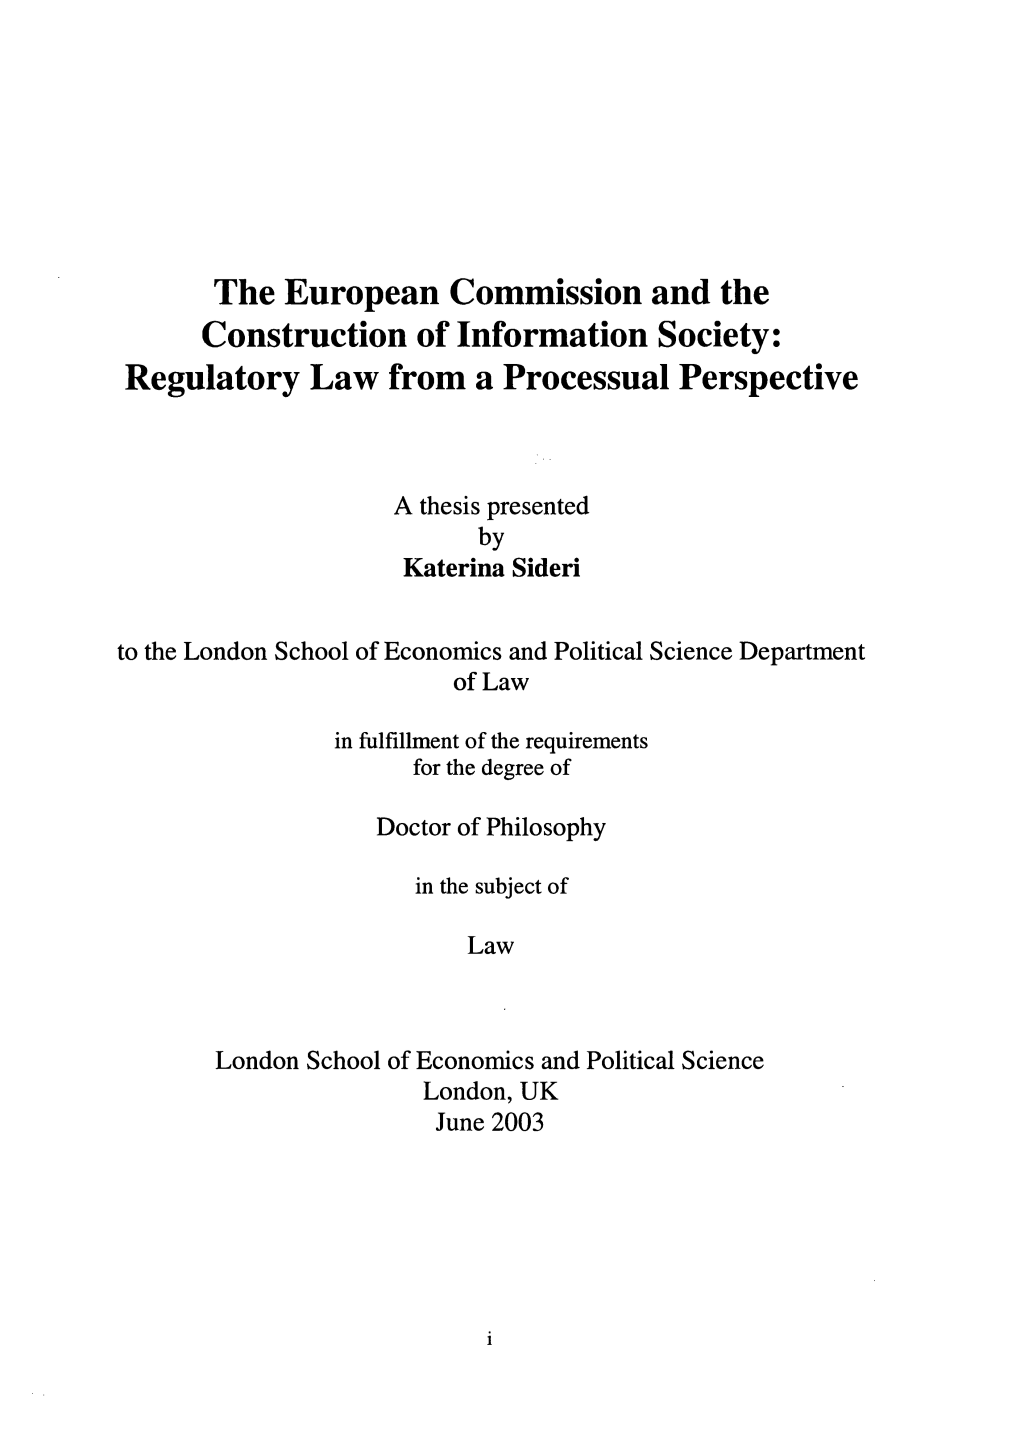 The European Commission and the Construction of Information Society: Regulatory Law from a Processual Perspective